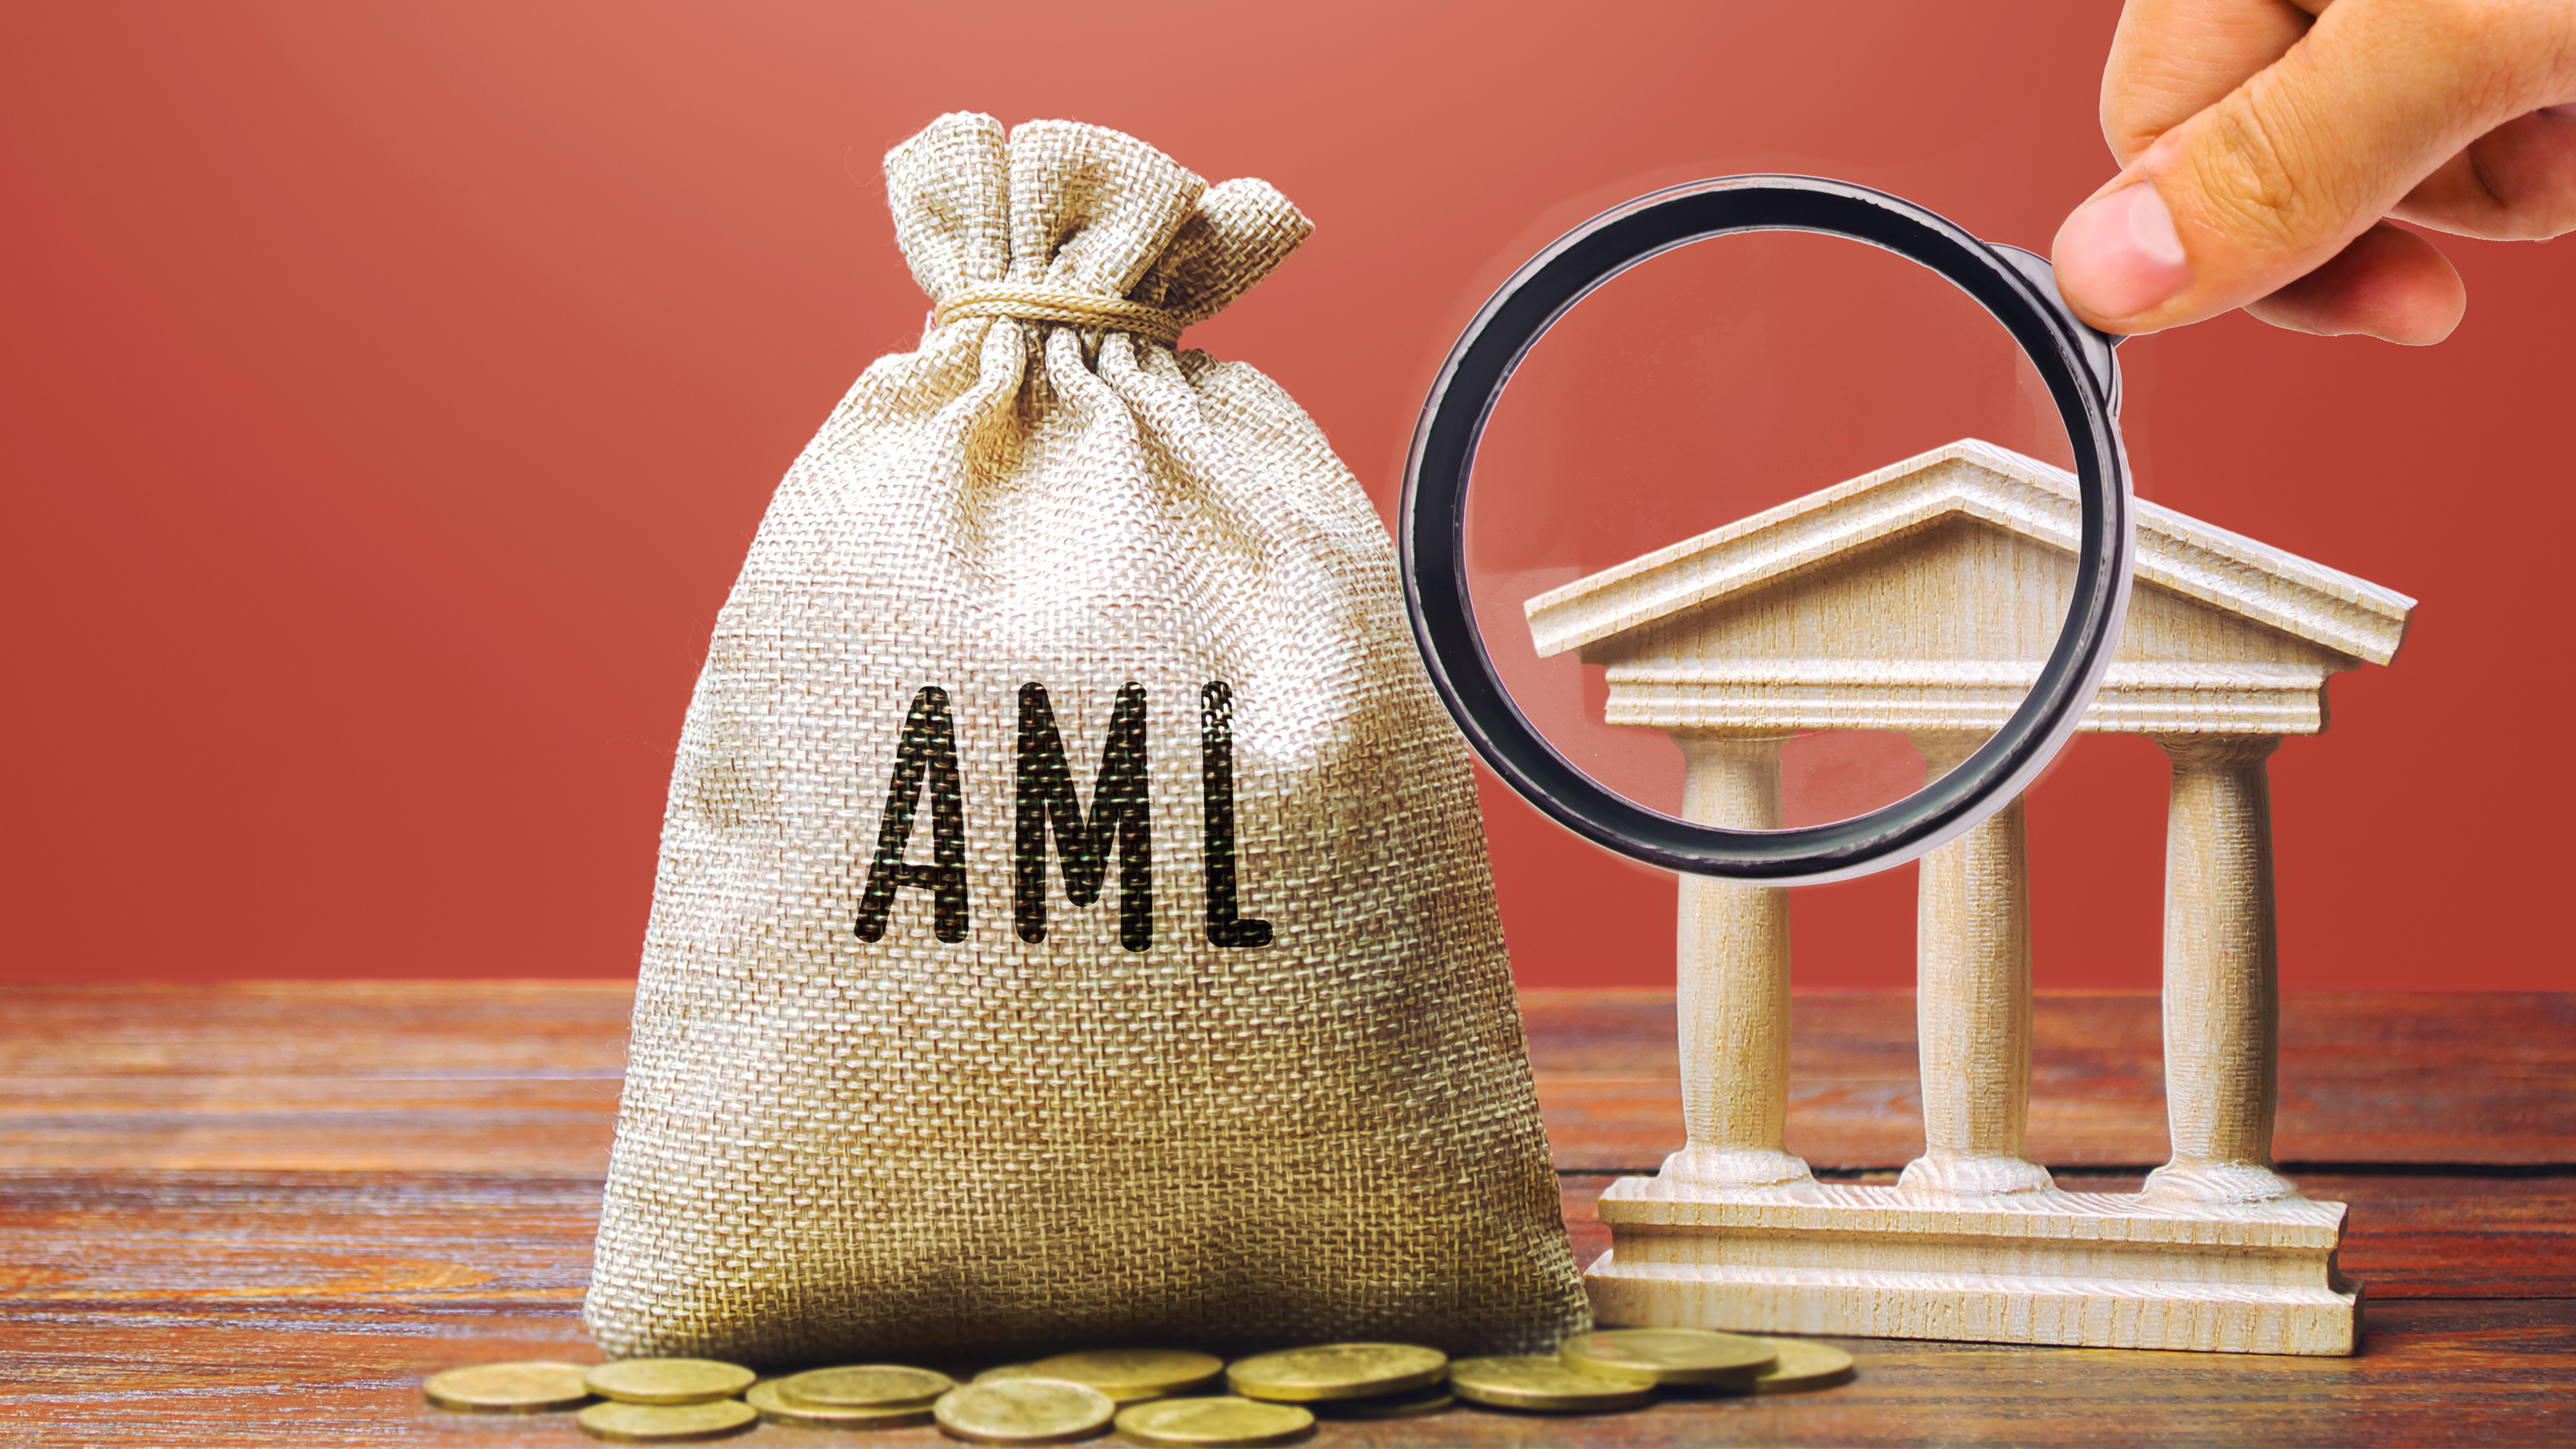 A hessian bag with "AML" inscribed on its front, a hand holding a magnifying glass, a model of a bank facade, and coins scattered on a desk. 